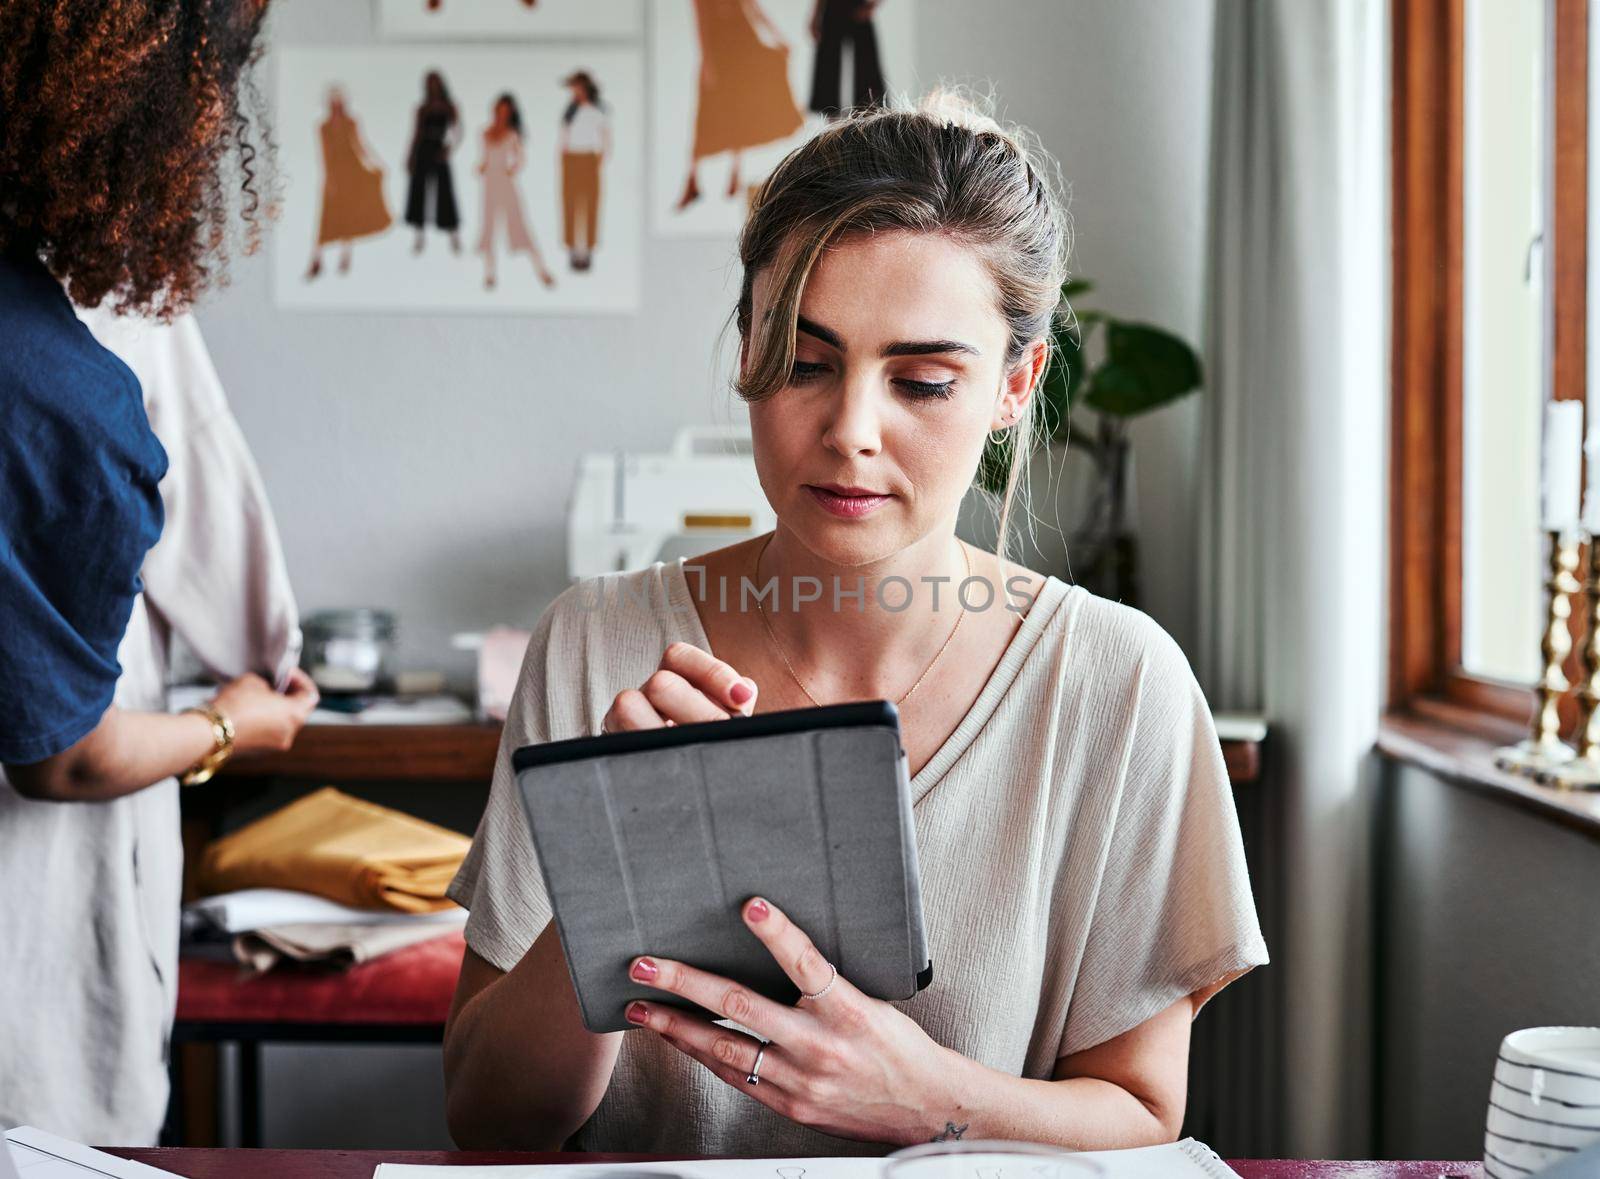 Studying a few fashion trends online. a fashion designer using a digital tablet while sitting in her workshop